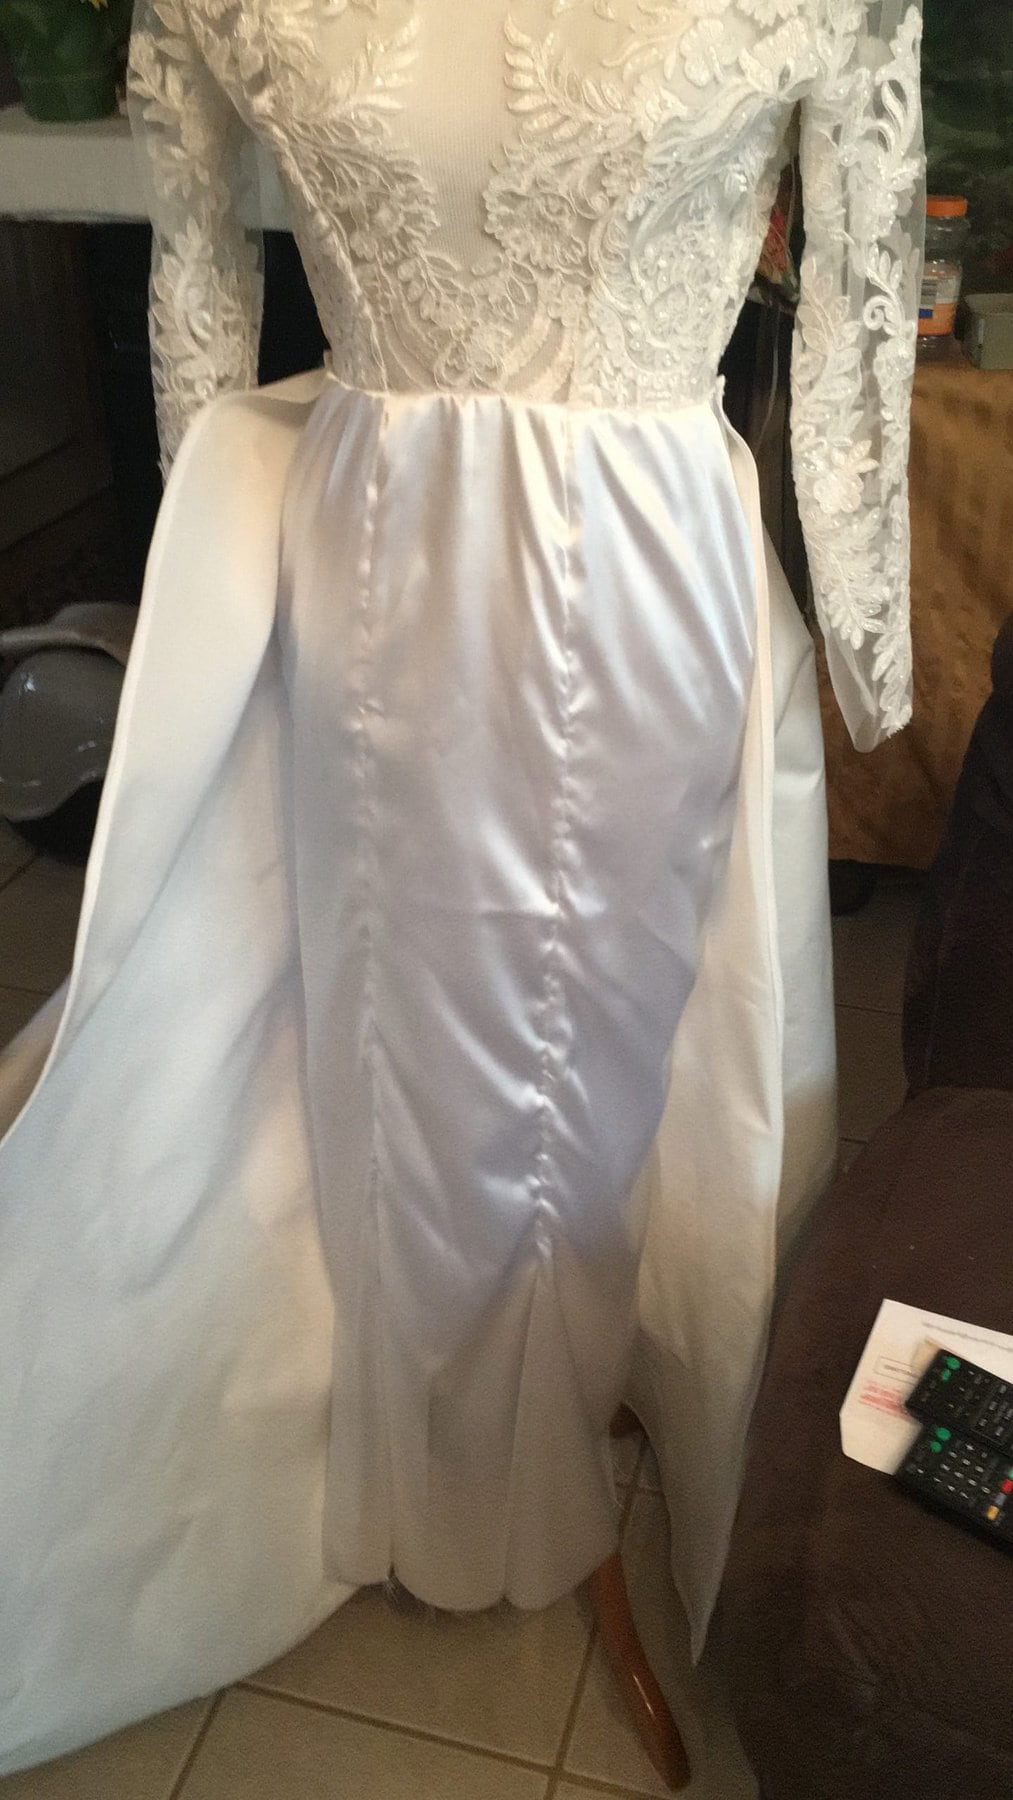 Wedding gown in progress as Kendy Manzano works on her senior collection